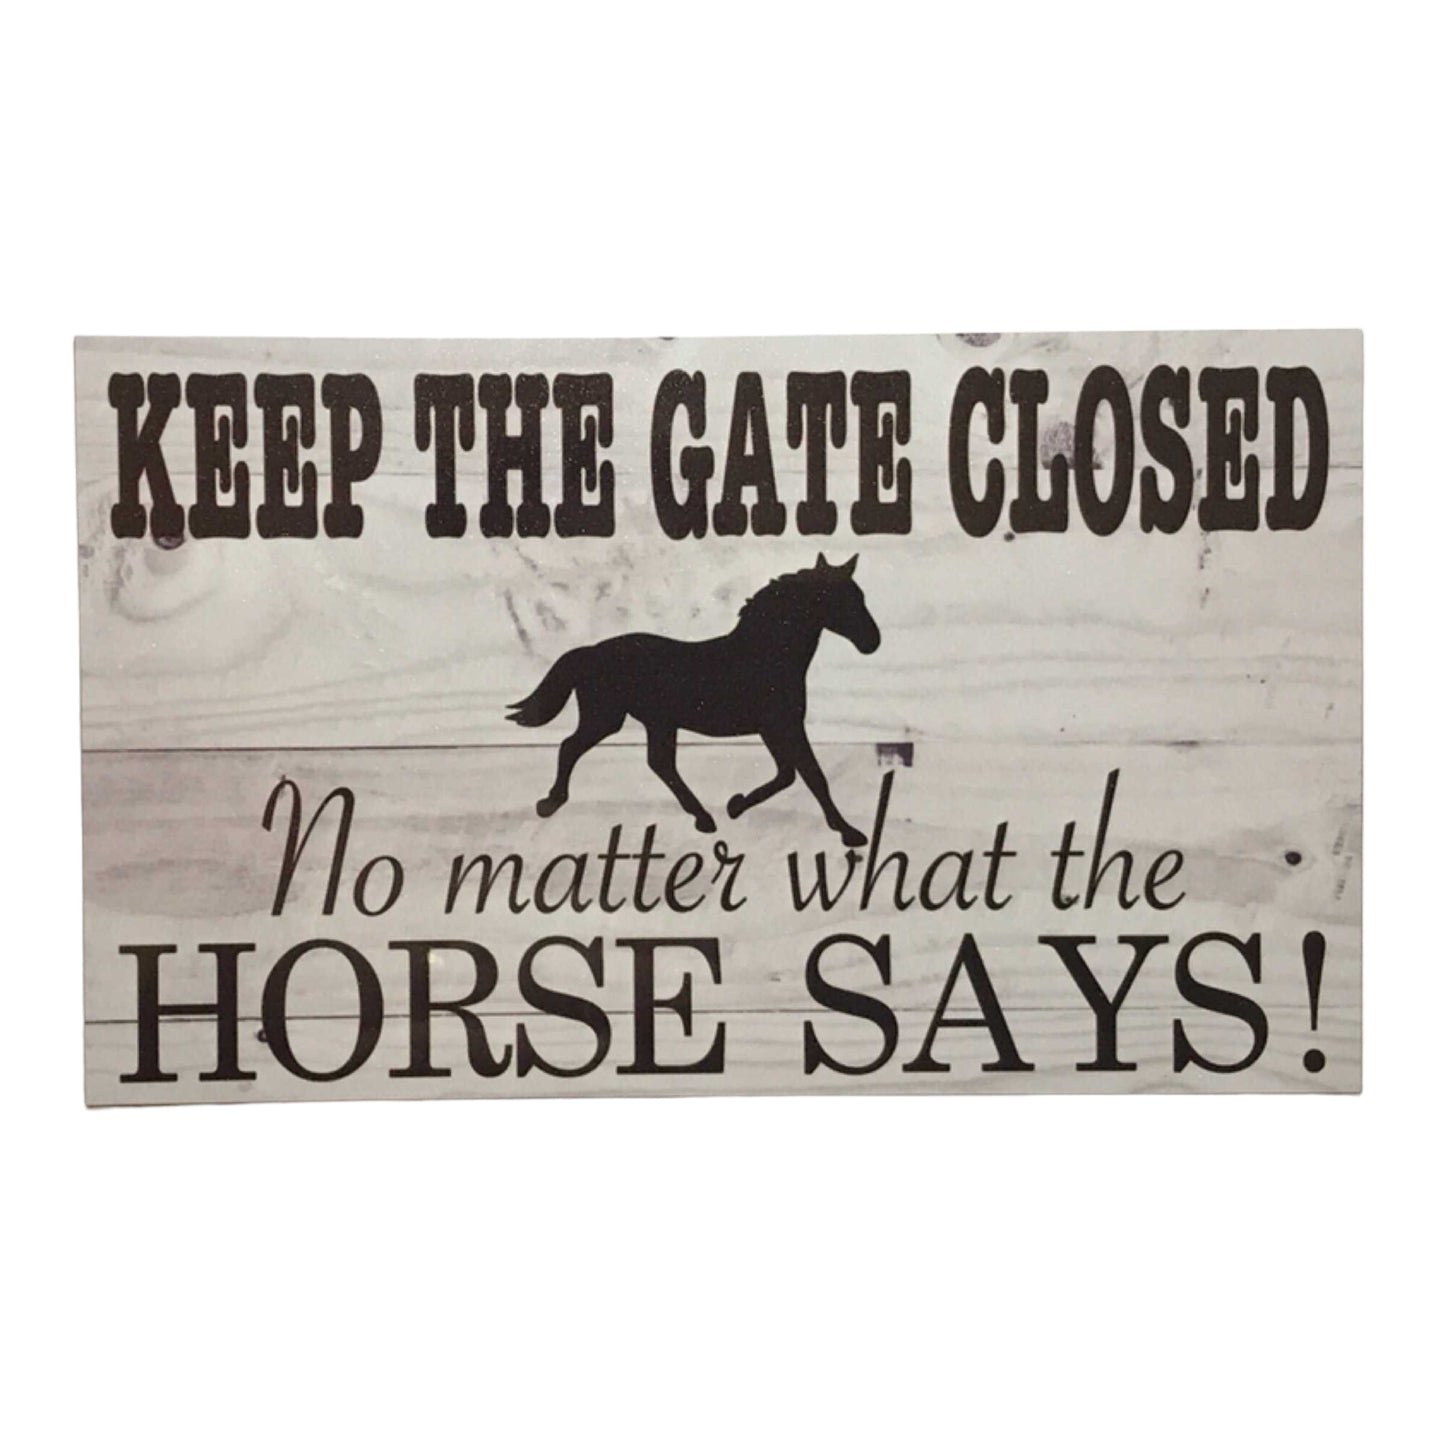 Horse Keep The Gate Closed Sign - The Renmy Store Homewares & Gifts 